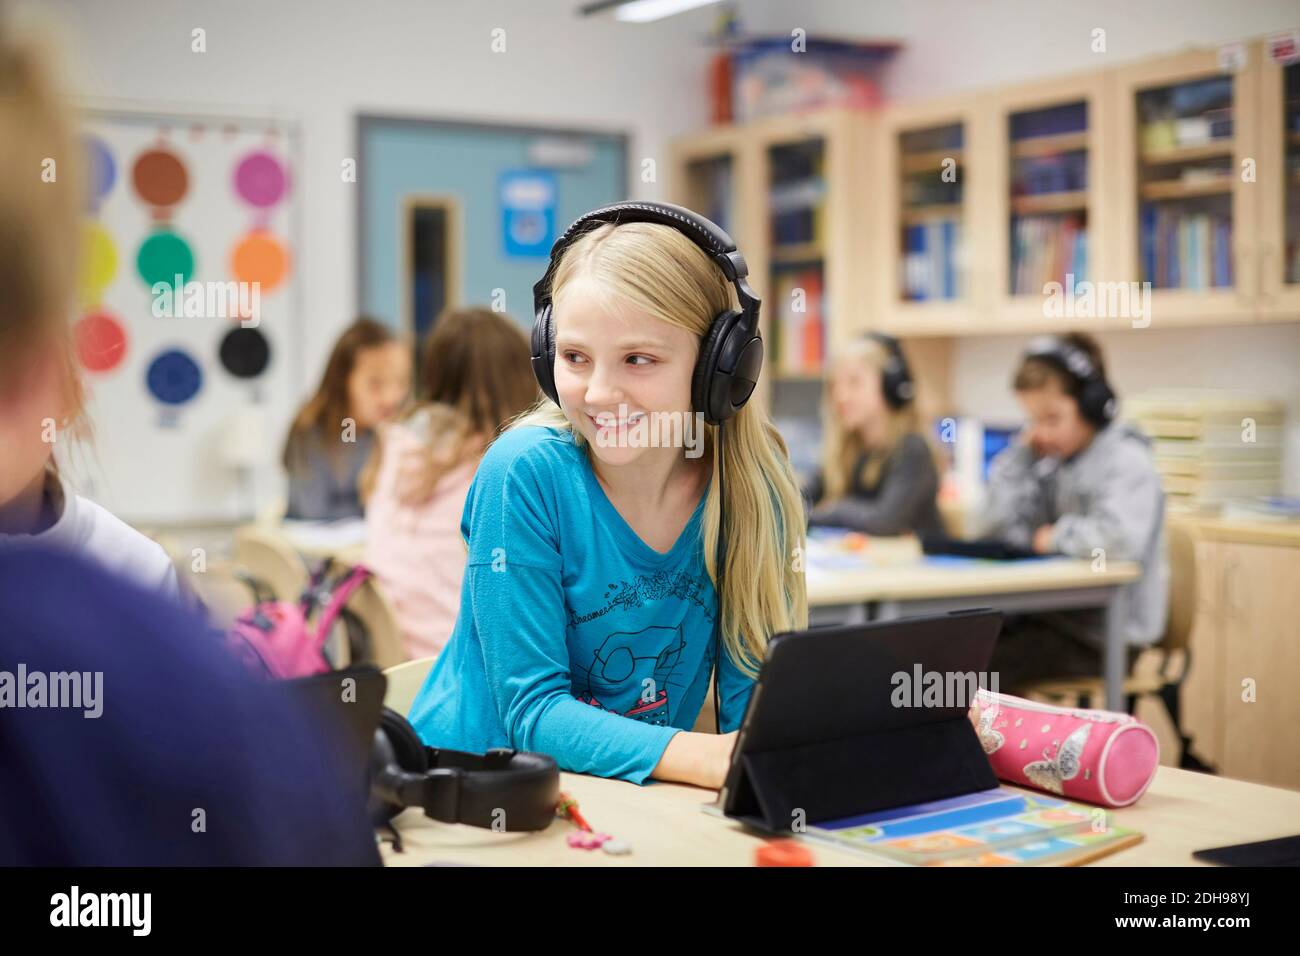 Smiling girl wearing headphones while using digital table in classroom Stock Photo